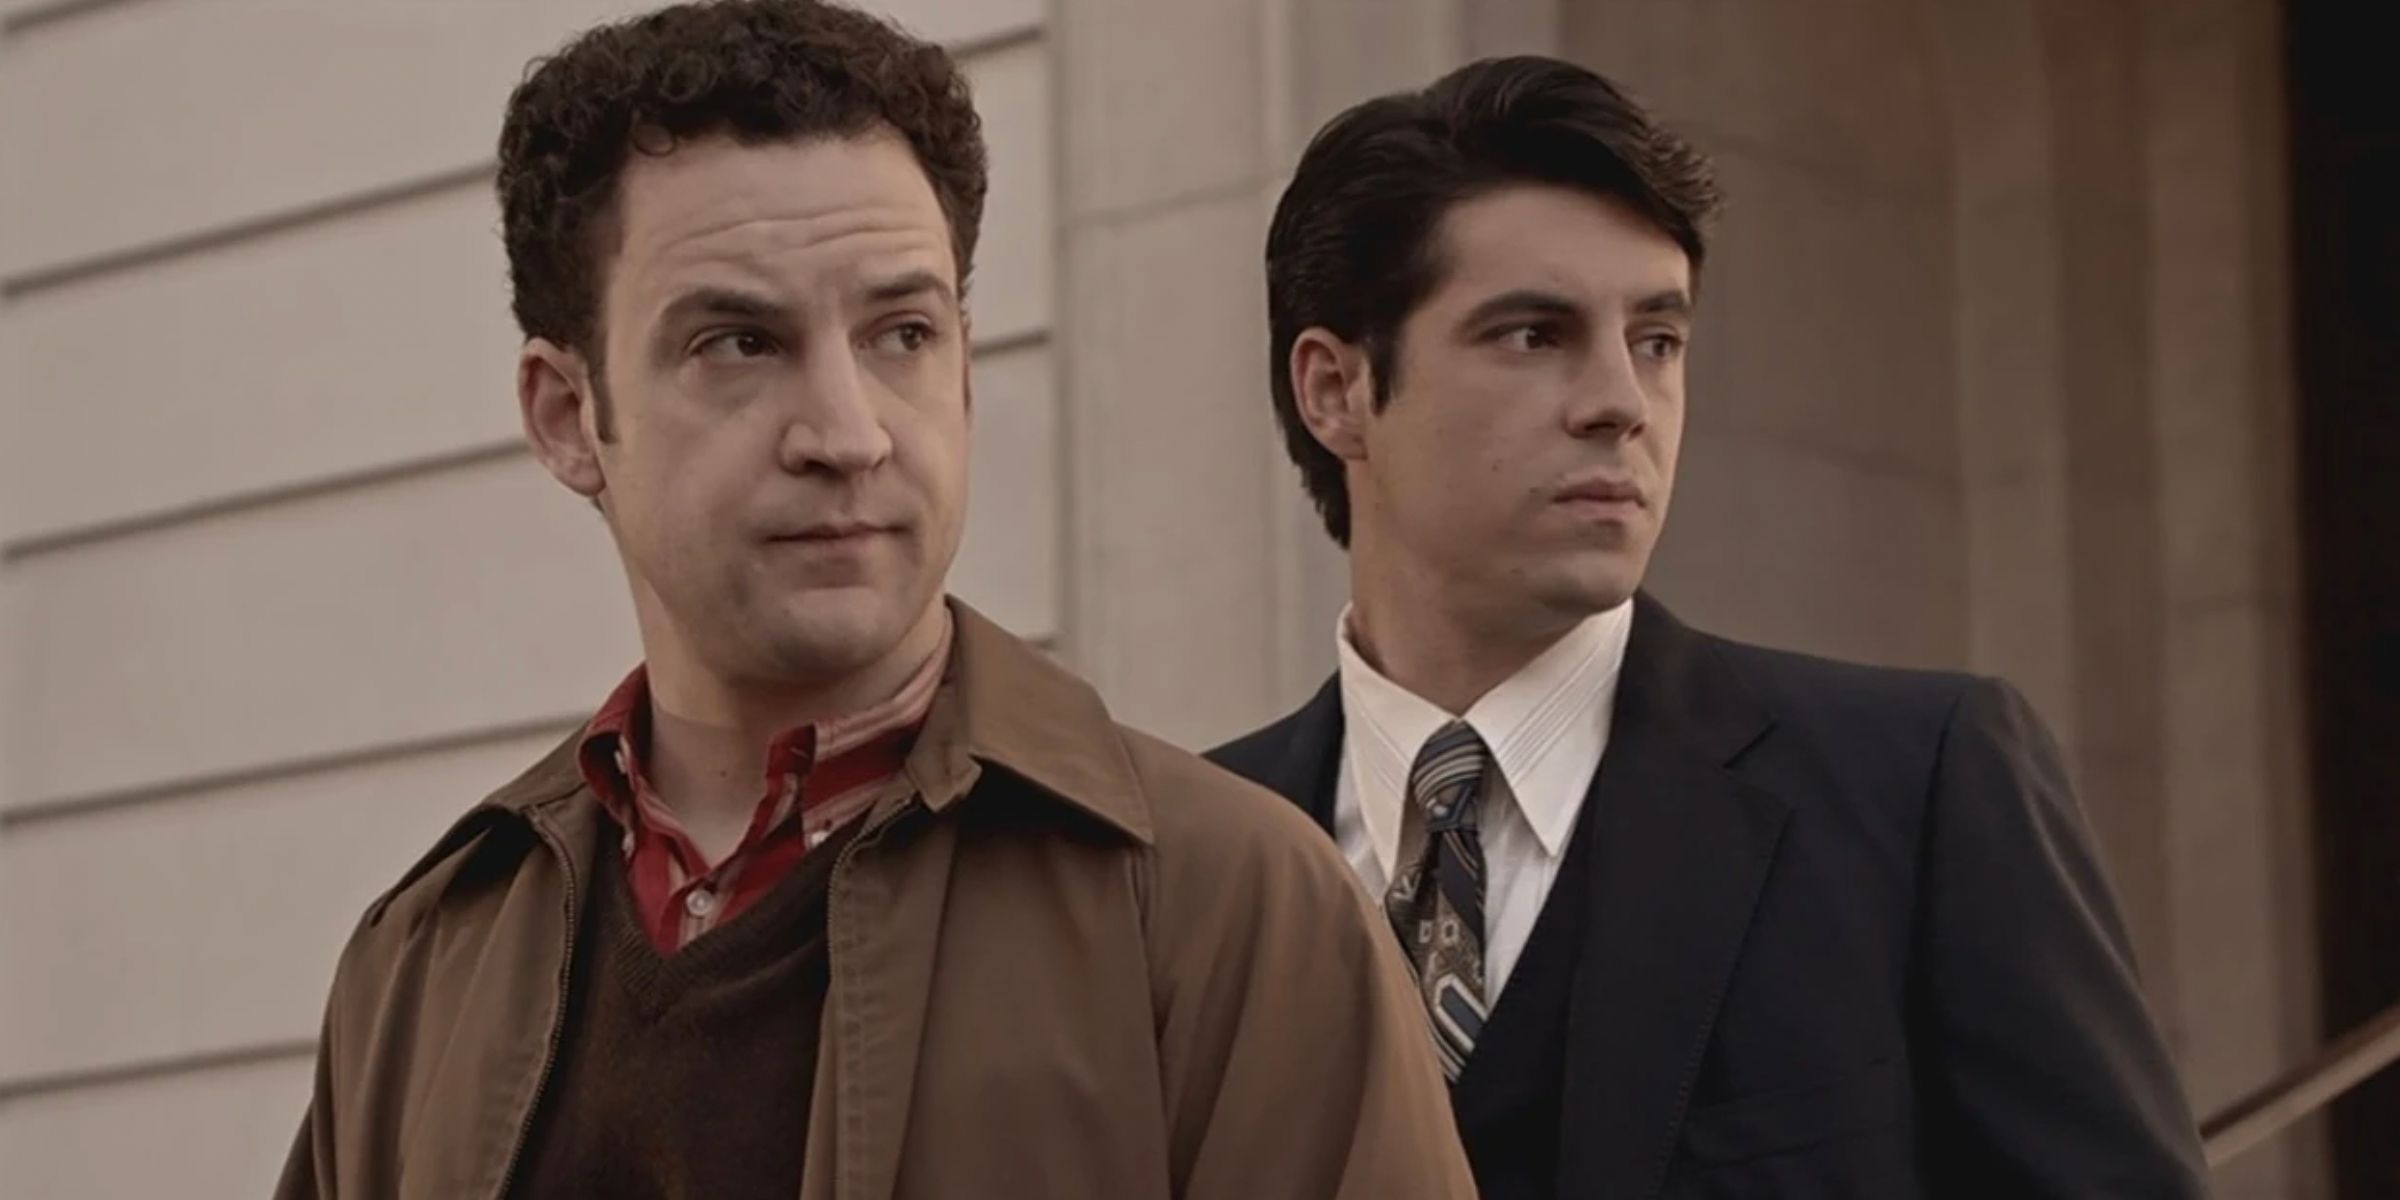 A young Jason Gideon and David Rossi in a Criminal Minds flashback